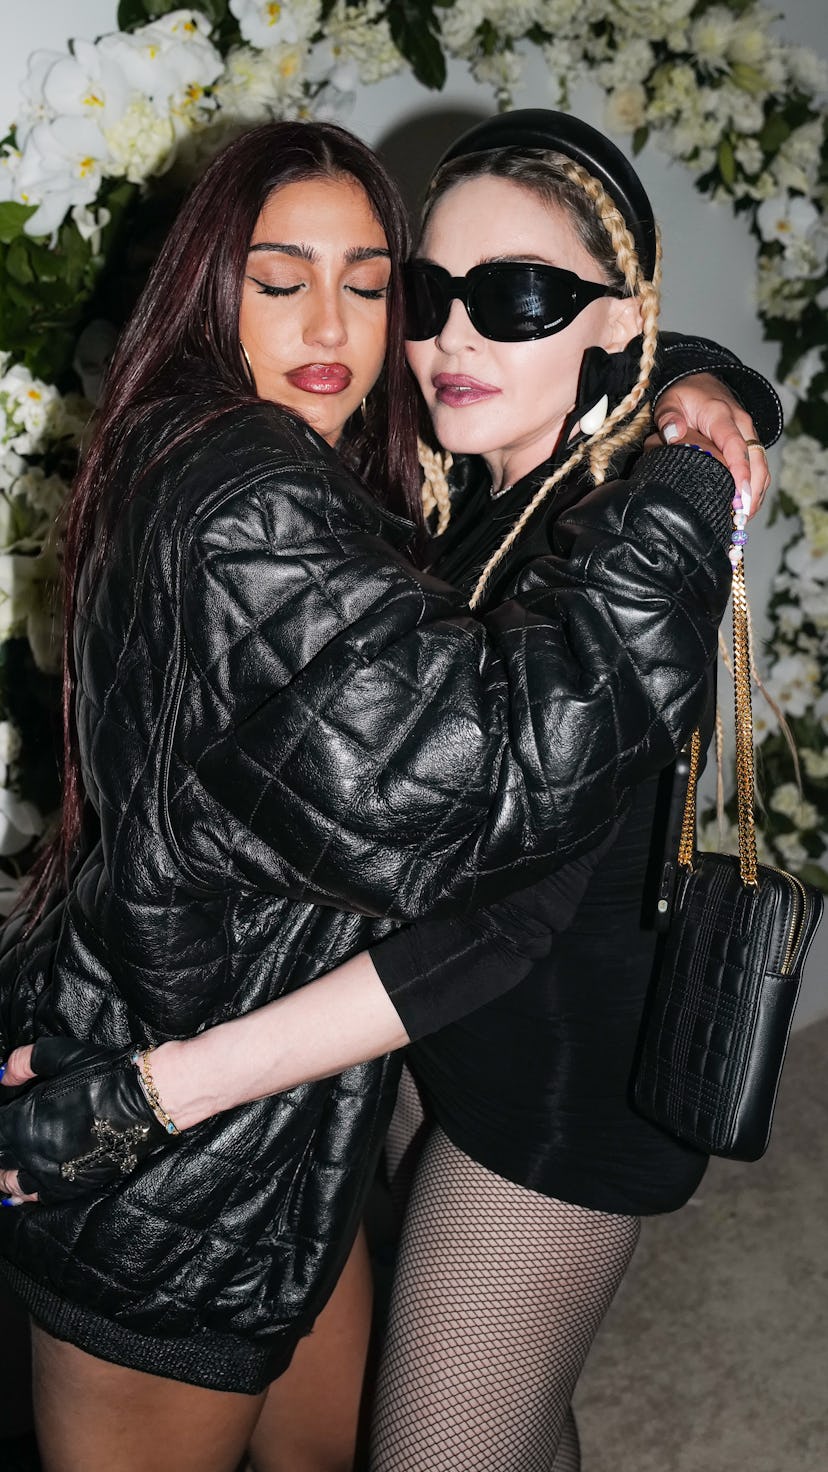 Lourdes Leon and Madonna celebrate Burberry’s new Lola bag in West Hollywood on April 20.